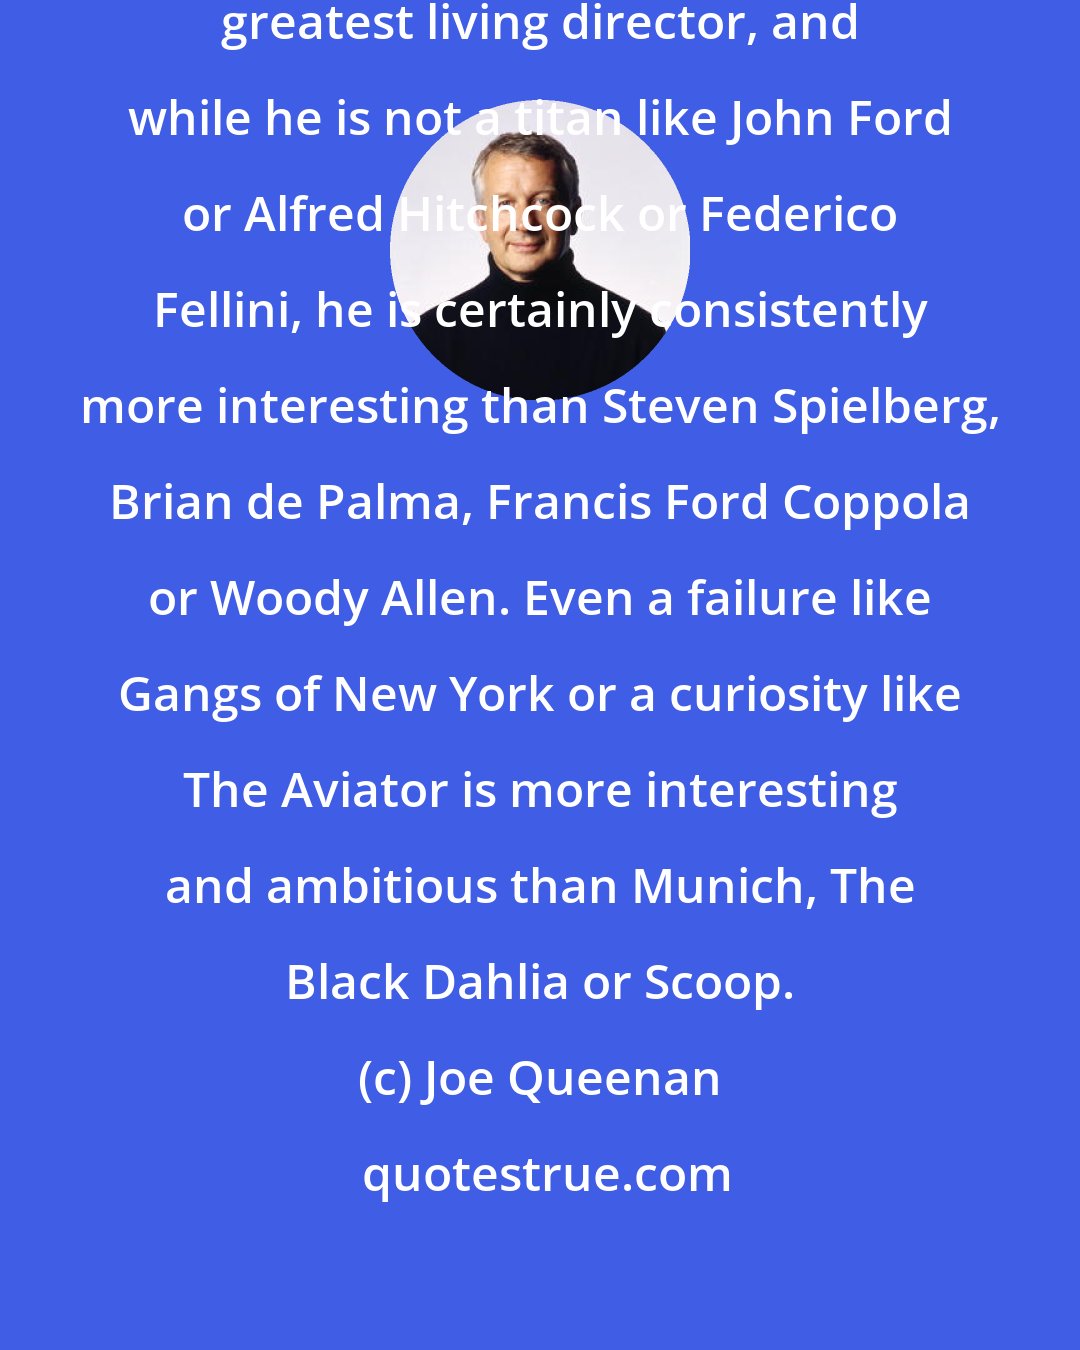 Joe Queenan: Martin Scorcese is probably America's greatest living director, and while he is not a titan like John Ford or Alfred Hitchcock or Federico Fellini, he is certainly consistently more interesting than Steven Spielberg, Brian de Palma, Francis Ford Coppola or Woody Allen. Even a failure like Gangs of New York or a curiosity like The Aviator is more interesting and ambitious than Munich, The Black Dahlia or Scoop.